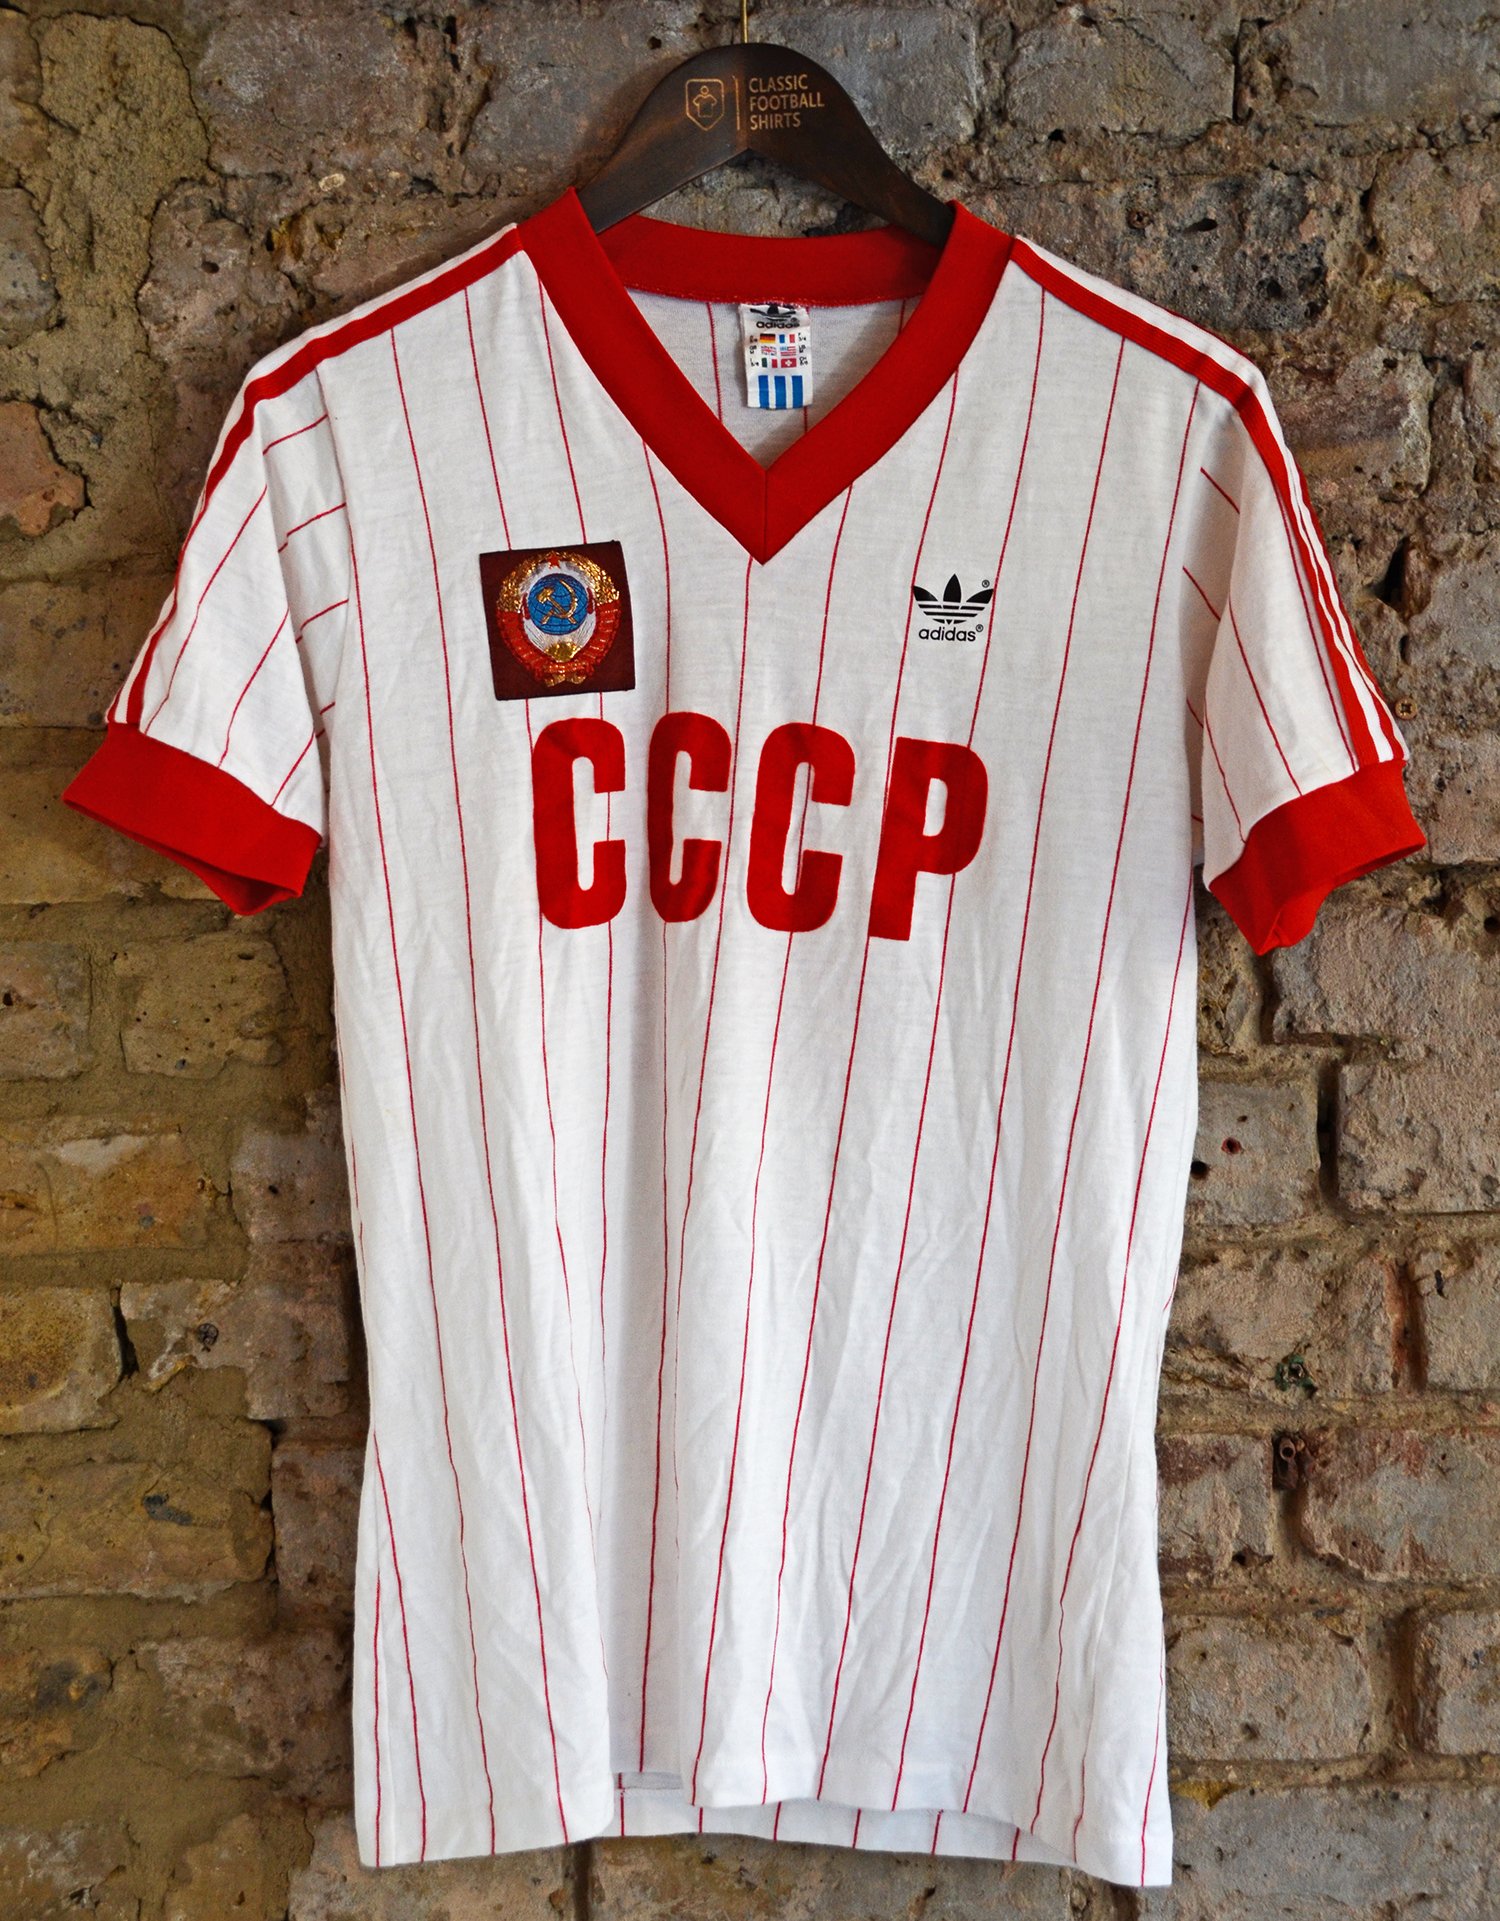 Classic Football on Twitter: "CCCP x Adidas https://t.co/ZYk0by7o9r" /